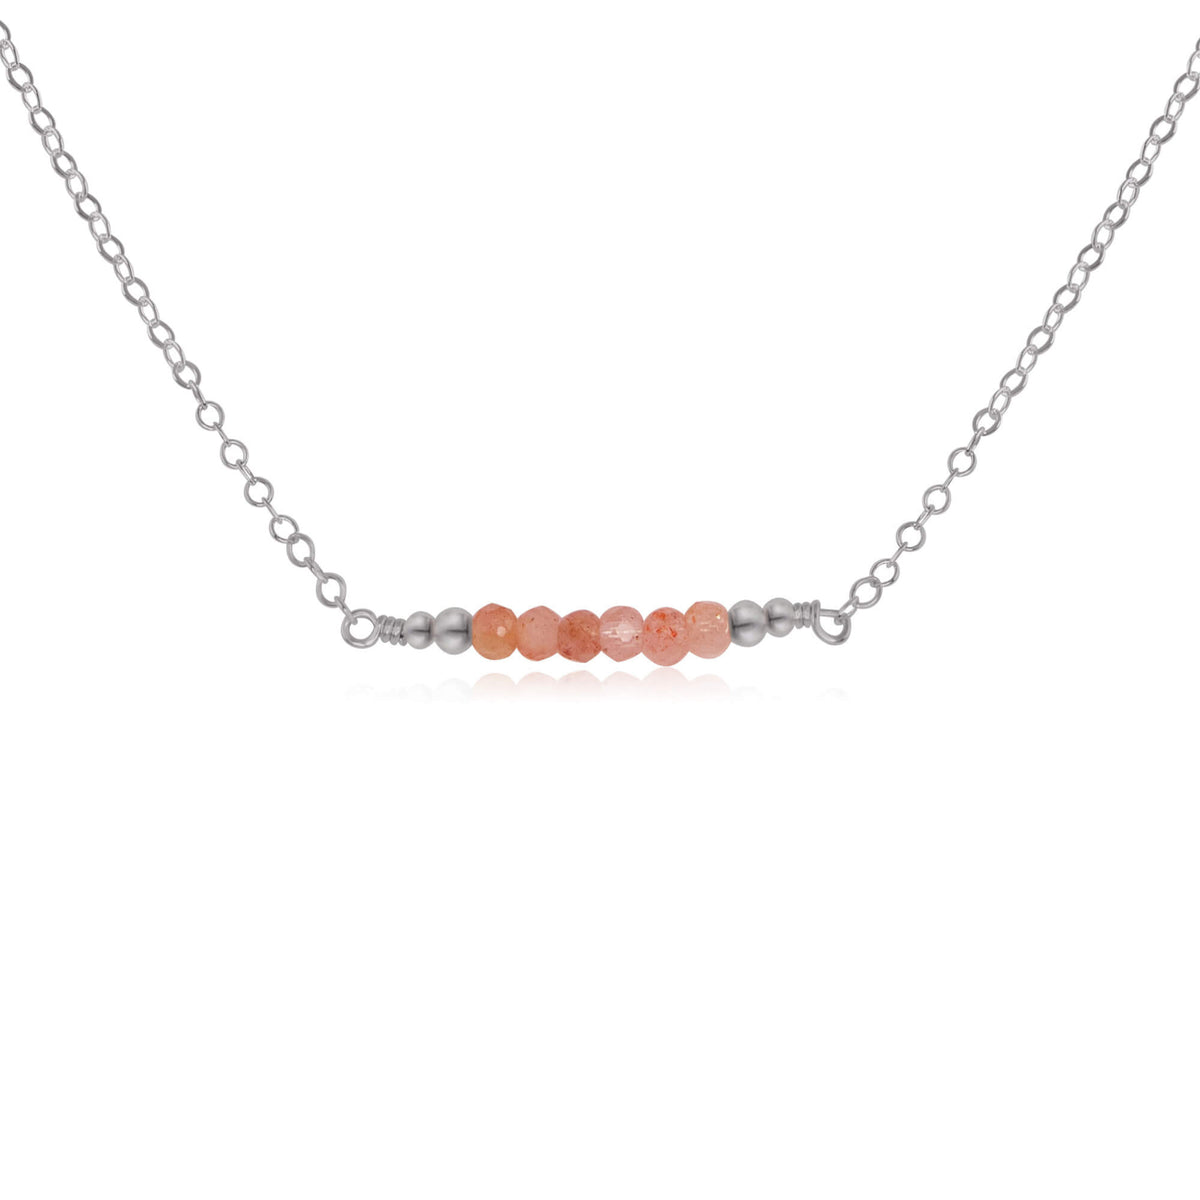 Faceted Bead Bar Necklace - Sunstone - Stainless Steel - Luna Tide Handmade Jewellery